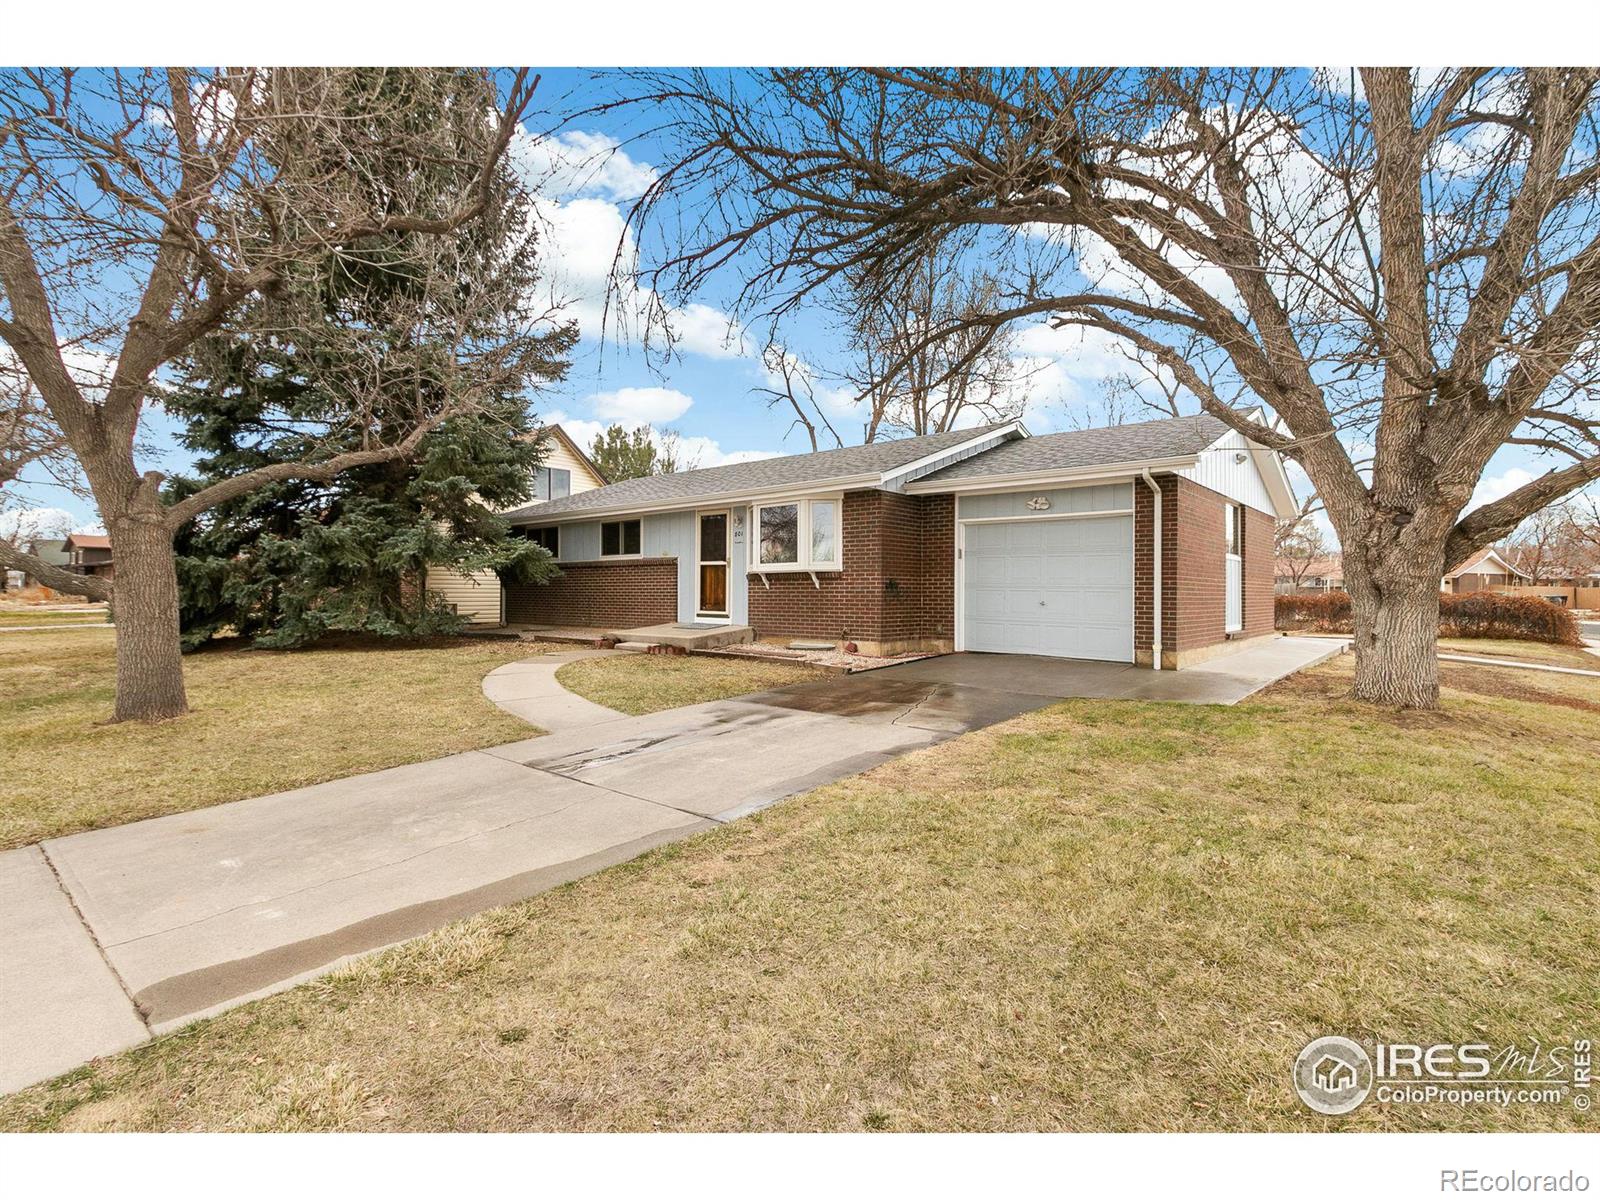 801 s pratt parkway, Longmont sold home. Closed on 2024-03-29 for $575,000.